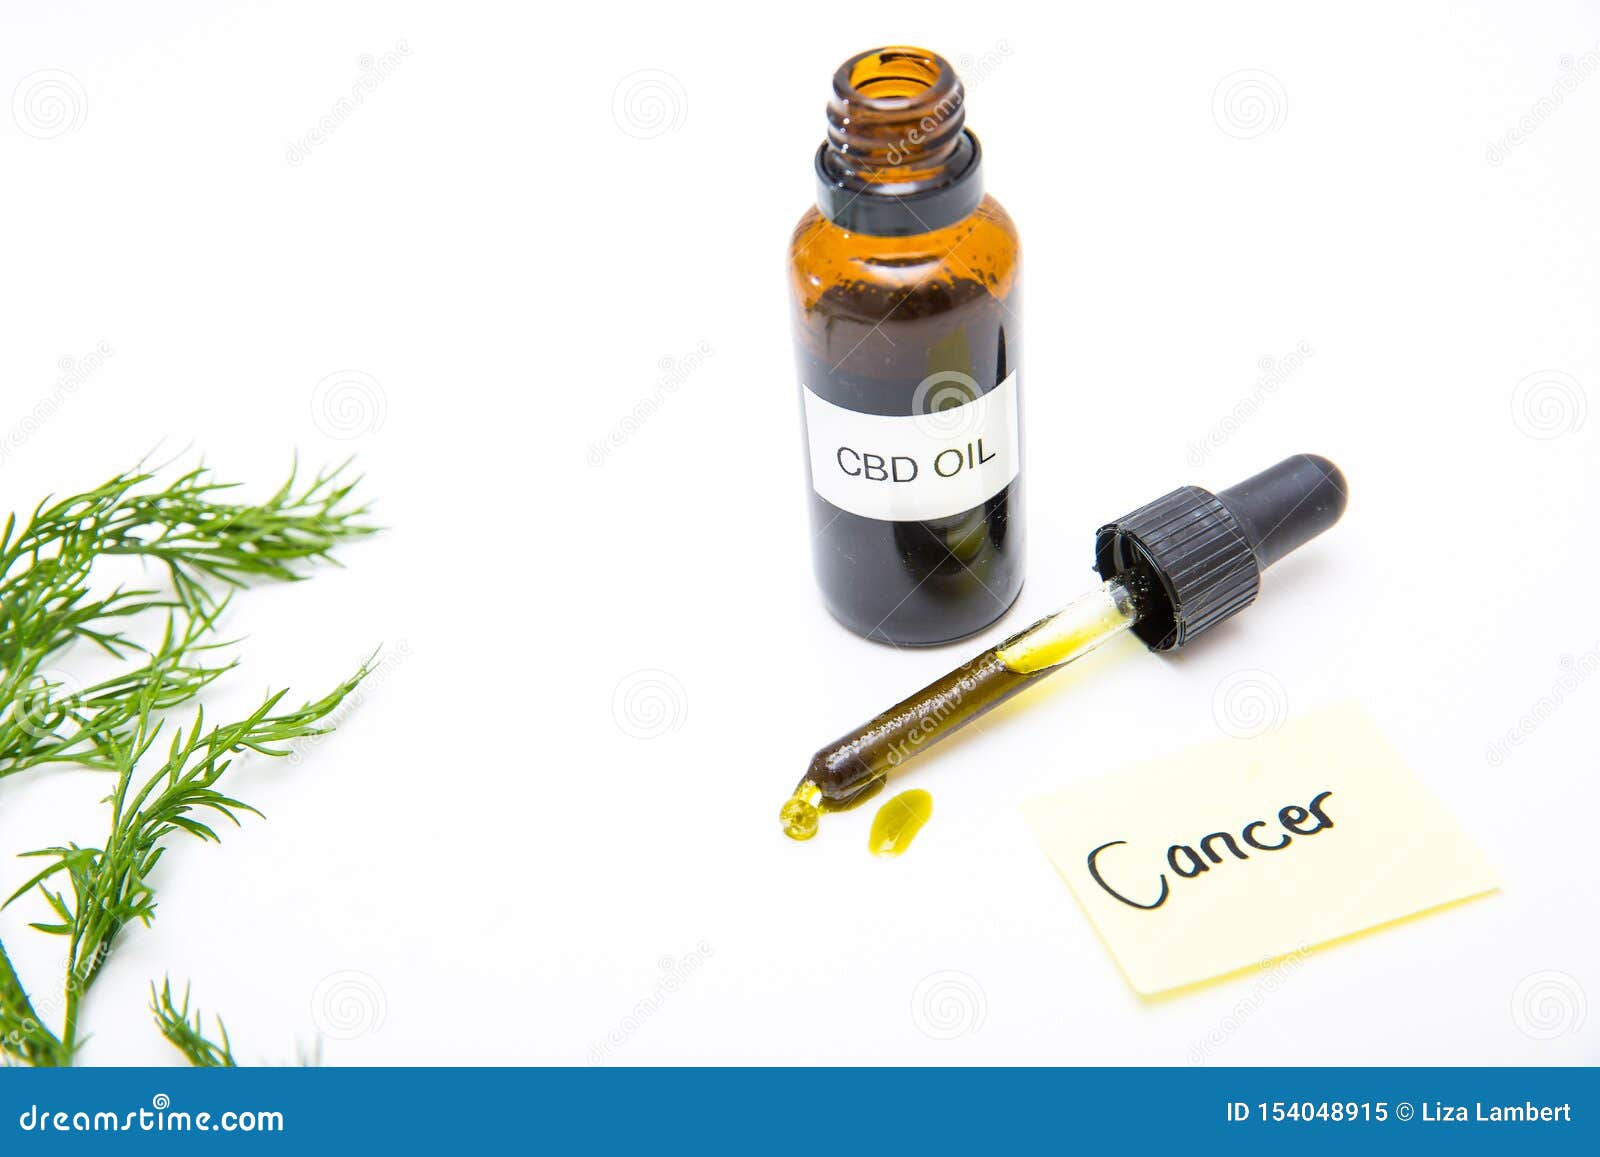 WHAT STORES CARRY CBC OIL AROUND ME - Cbd|Oil|Benefits|Cbc|Effects|Pain|Study|Health|Thc|Products|Cannabinoids|Studies|Research|Anxiety|Cannabis|Symptoms|Evidence|People|System|Disease|Treatment|Inflammation|Hemp|Body|Receptors|Disorders|Brain|Plant|Cells|Side|Effect|Blood|Patients|Cancer|Product|Skin|Marijuana|Properties|Cannabidiol|Cannabinoid|Cbd Oil|Cbd Products|Cbc Oil|Side Effects|Endocannabinoid System|Chronic Pain|Multiple Sclerosis|Pain Relief|Cannabis Plant|Cbd Oil Benefits|Blood Pressure|Health Benefits|High Blood Pressure|Anti-Inflammatory Properties|Neuropathic Pain|Animal Studies|Hemp Plant|Hemp Oil|Anxiety Disorders|Cbd Product|Immune System|Clinical Trials|Cbd Gummies|Nerve Cells|Nervous System|Entourage Effect|Hemp Seed Oil|United States|Cbd Oils|Drug Administration